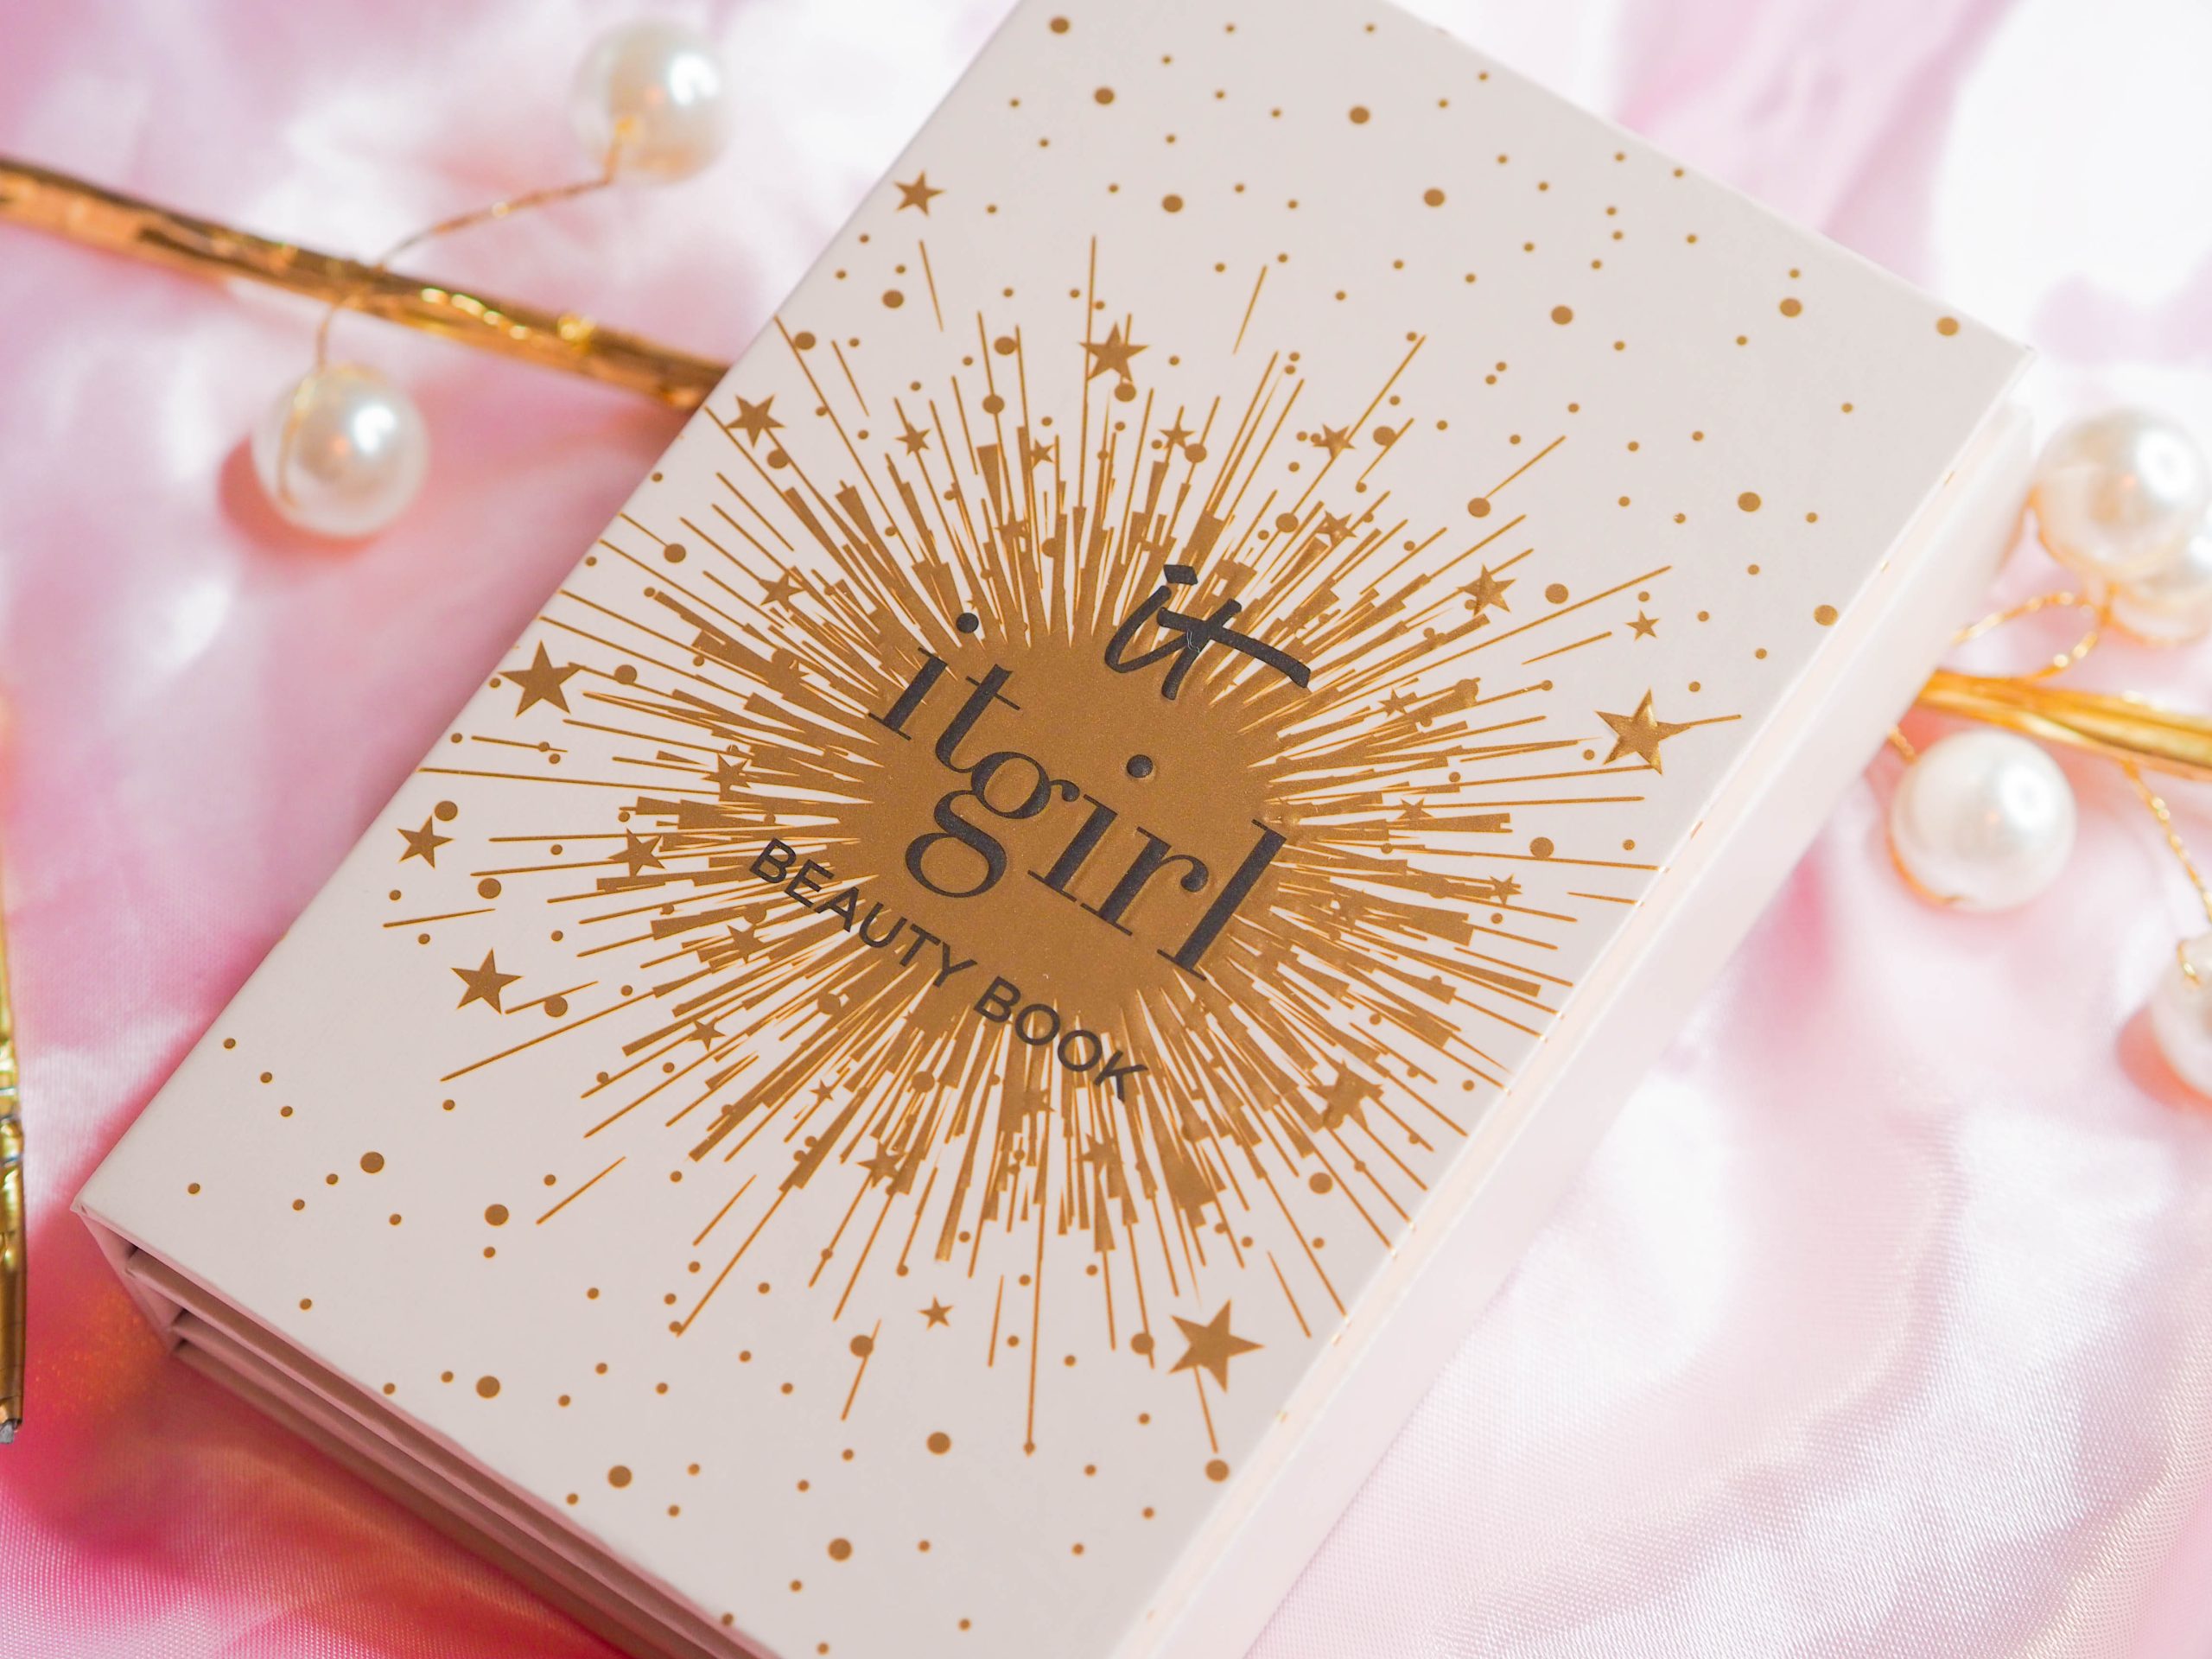 IT Cosmetics Limited Edition IT Girl Beauty Book 2019